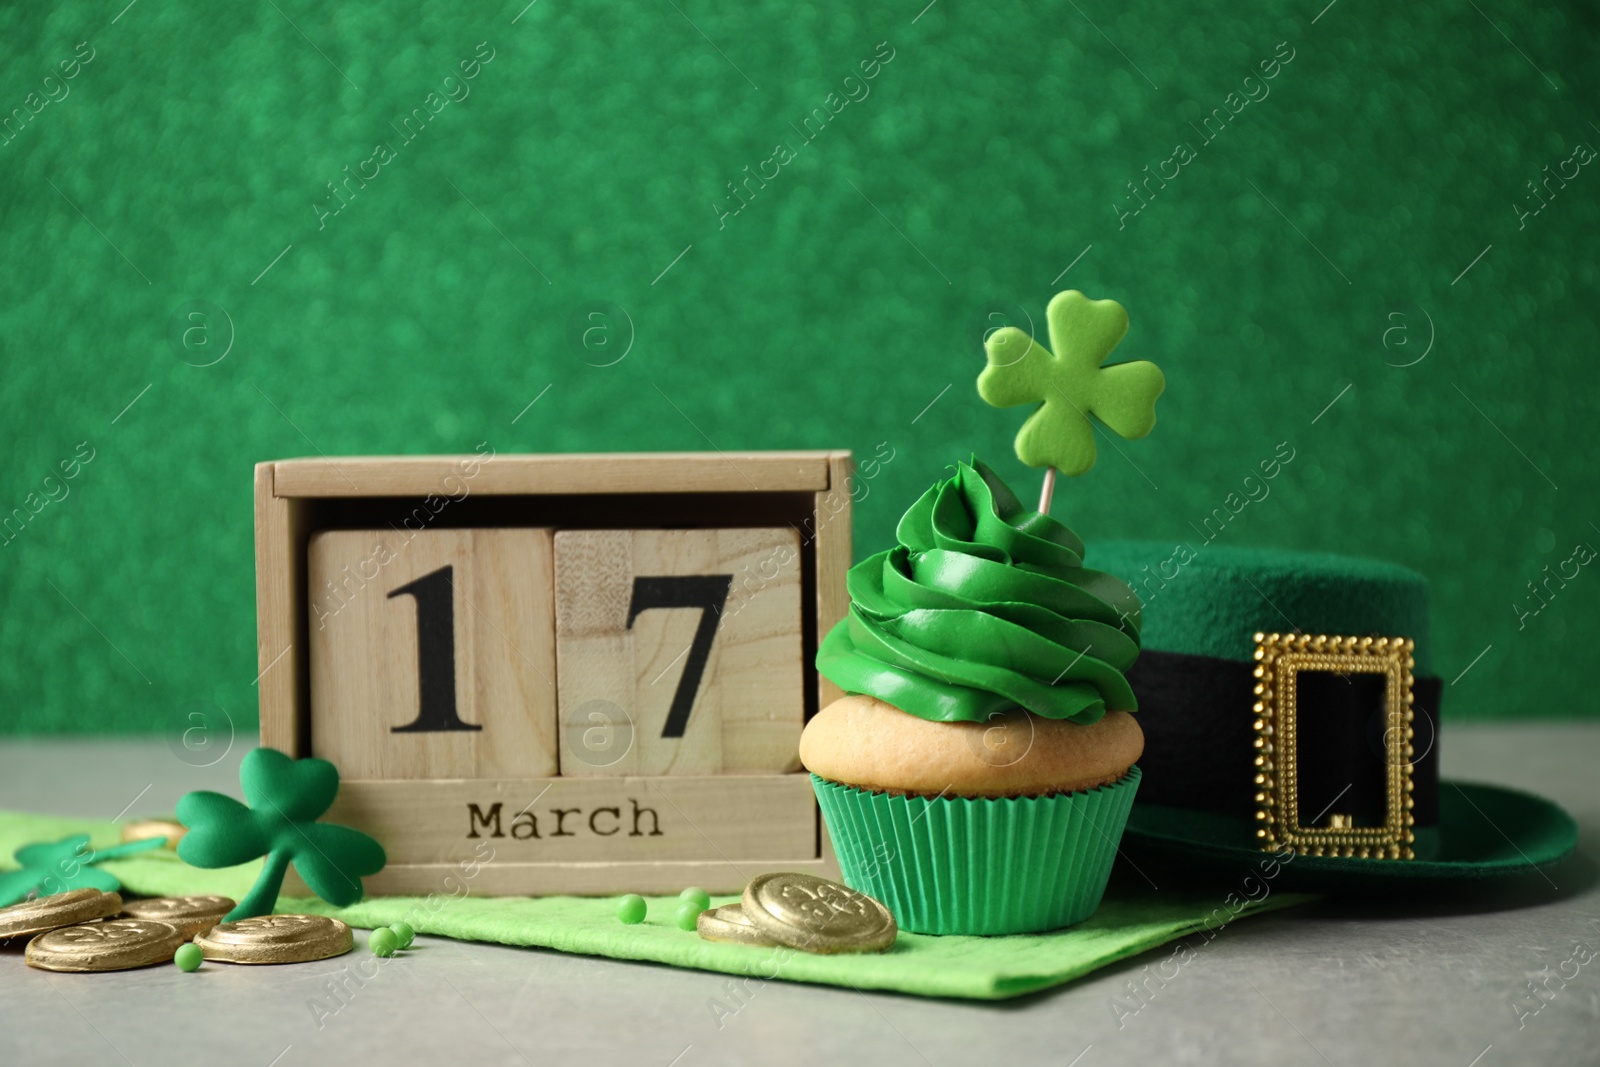 Photo of Decorated cupcake, wooden block calendar, hat and coins on grey table. St. Patrick's Day celebration